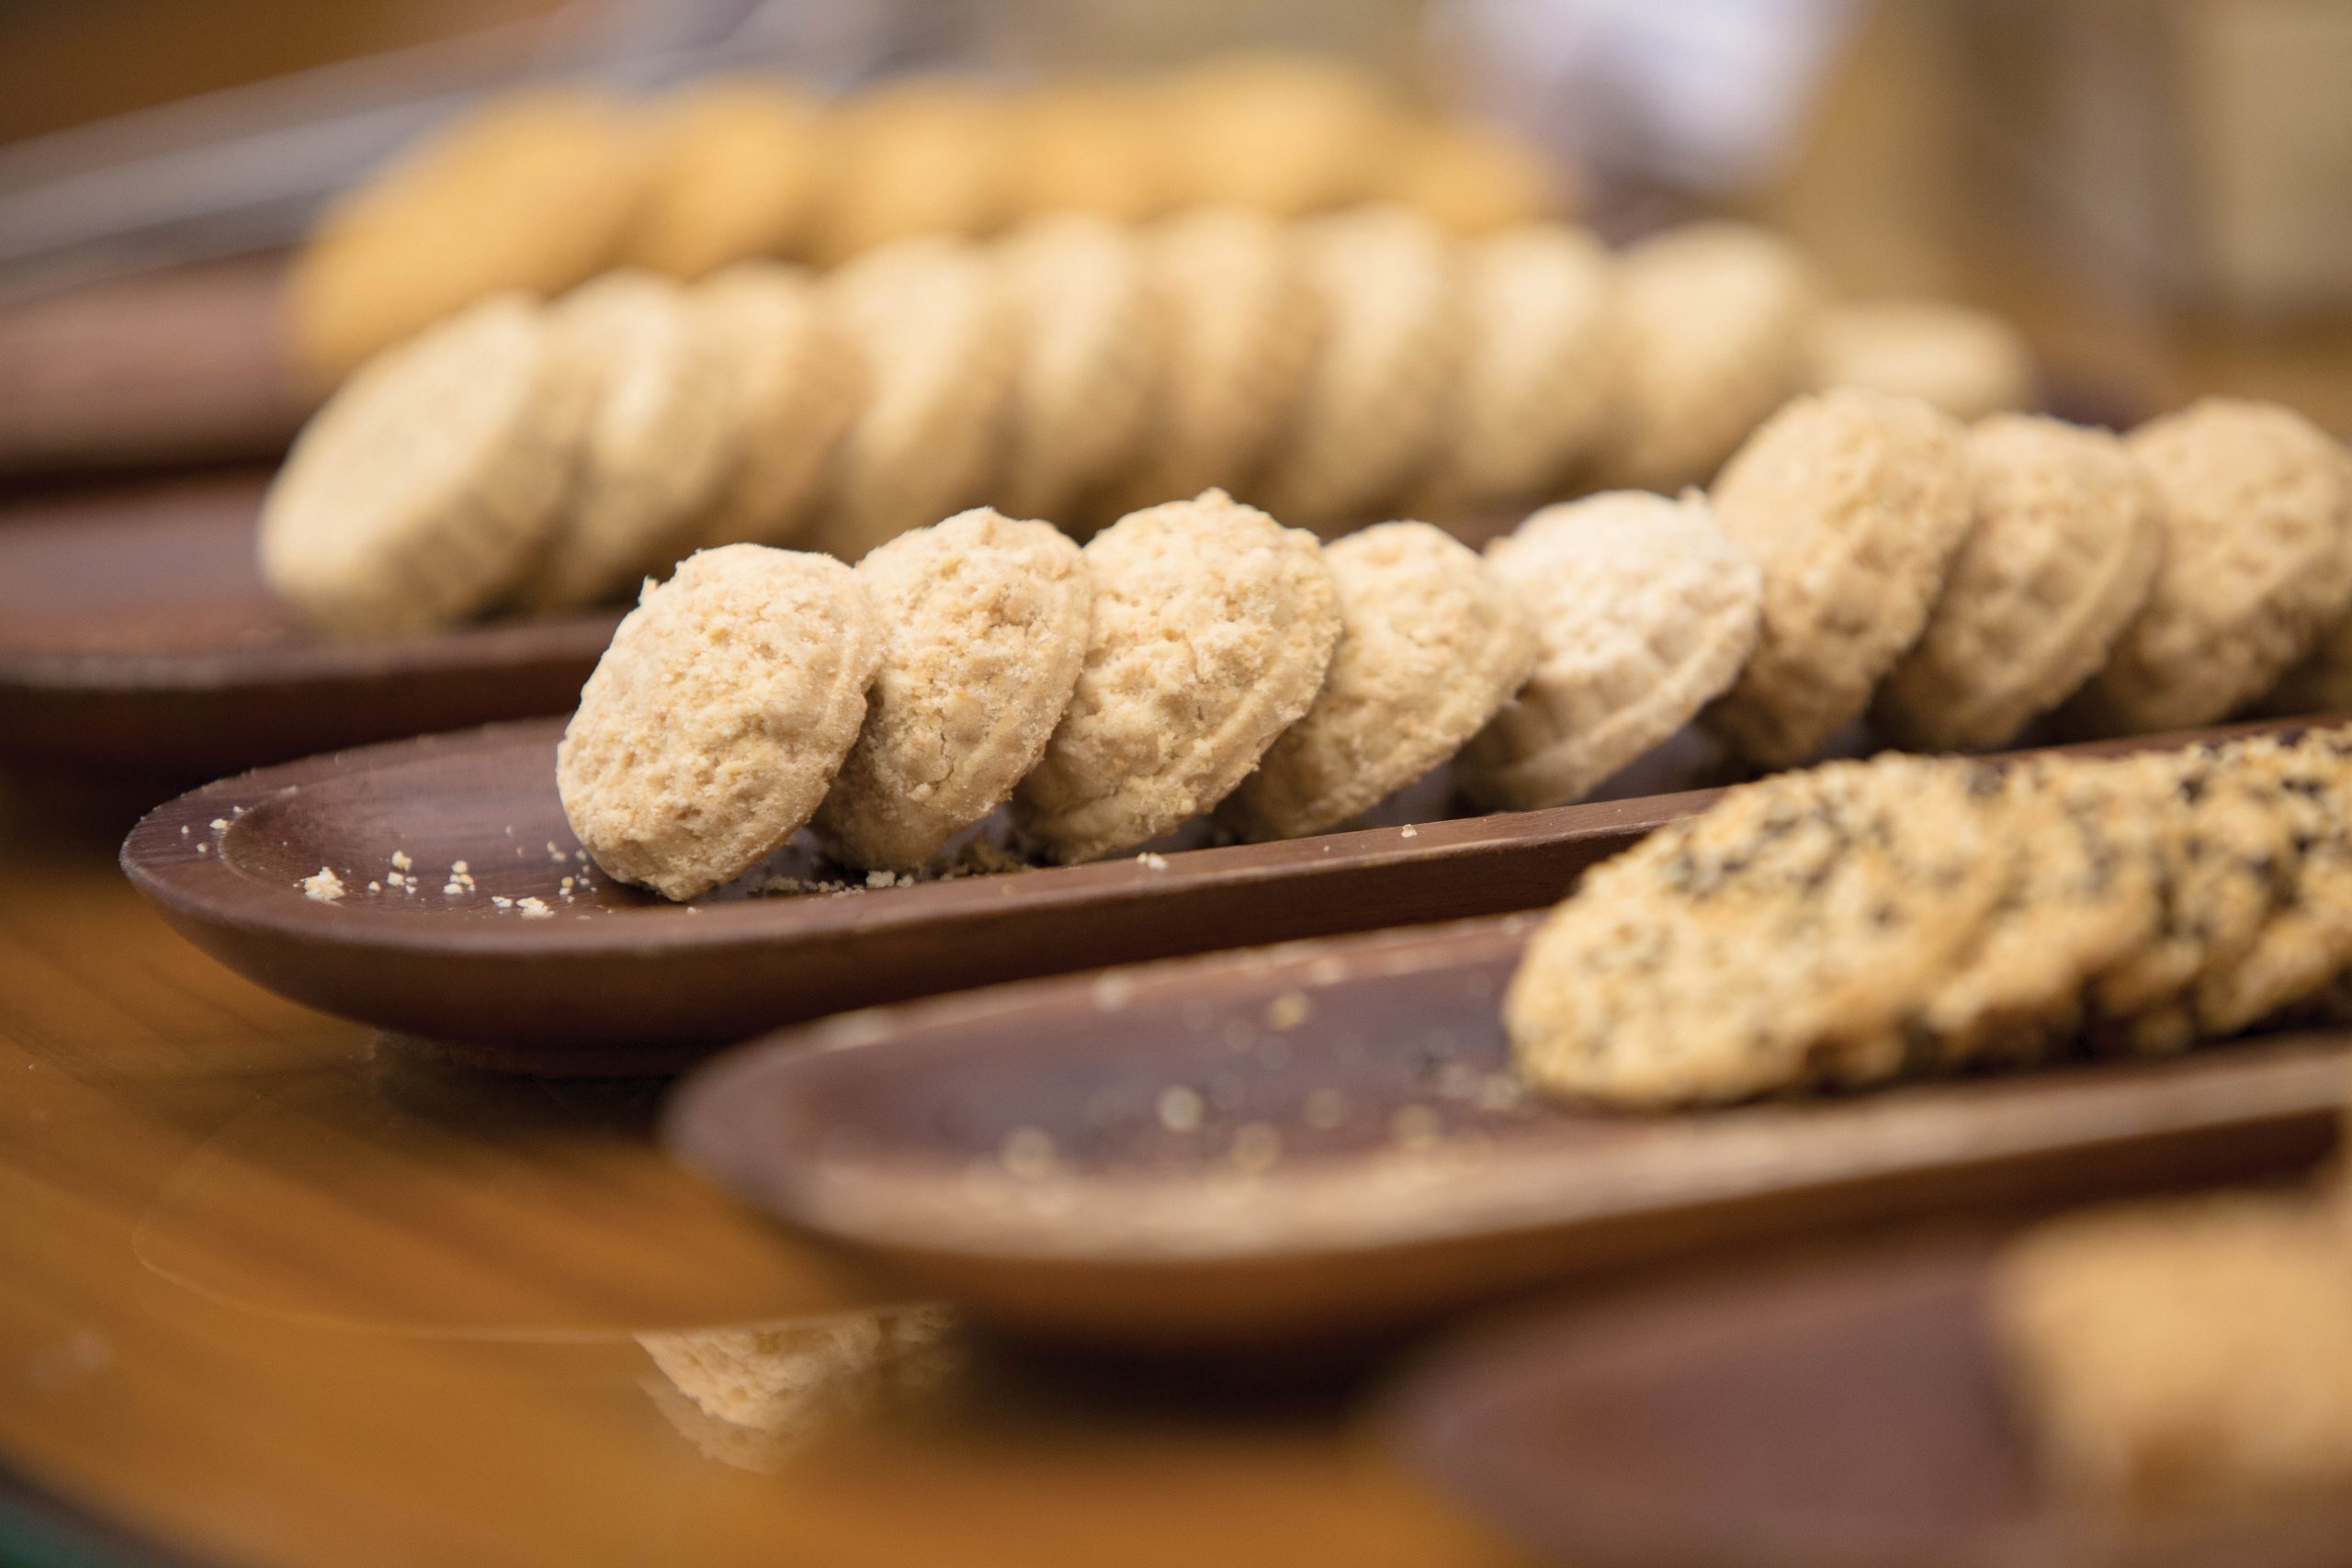 Confection of Almond Biscuits - Photo by António Sanmarful